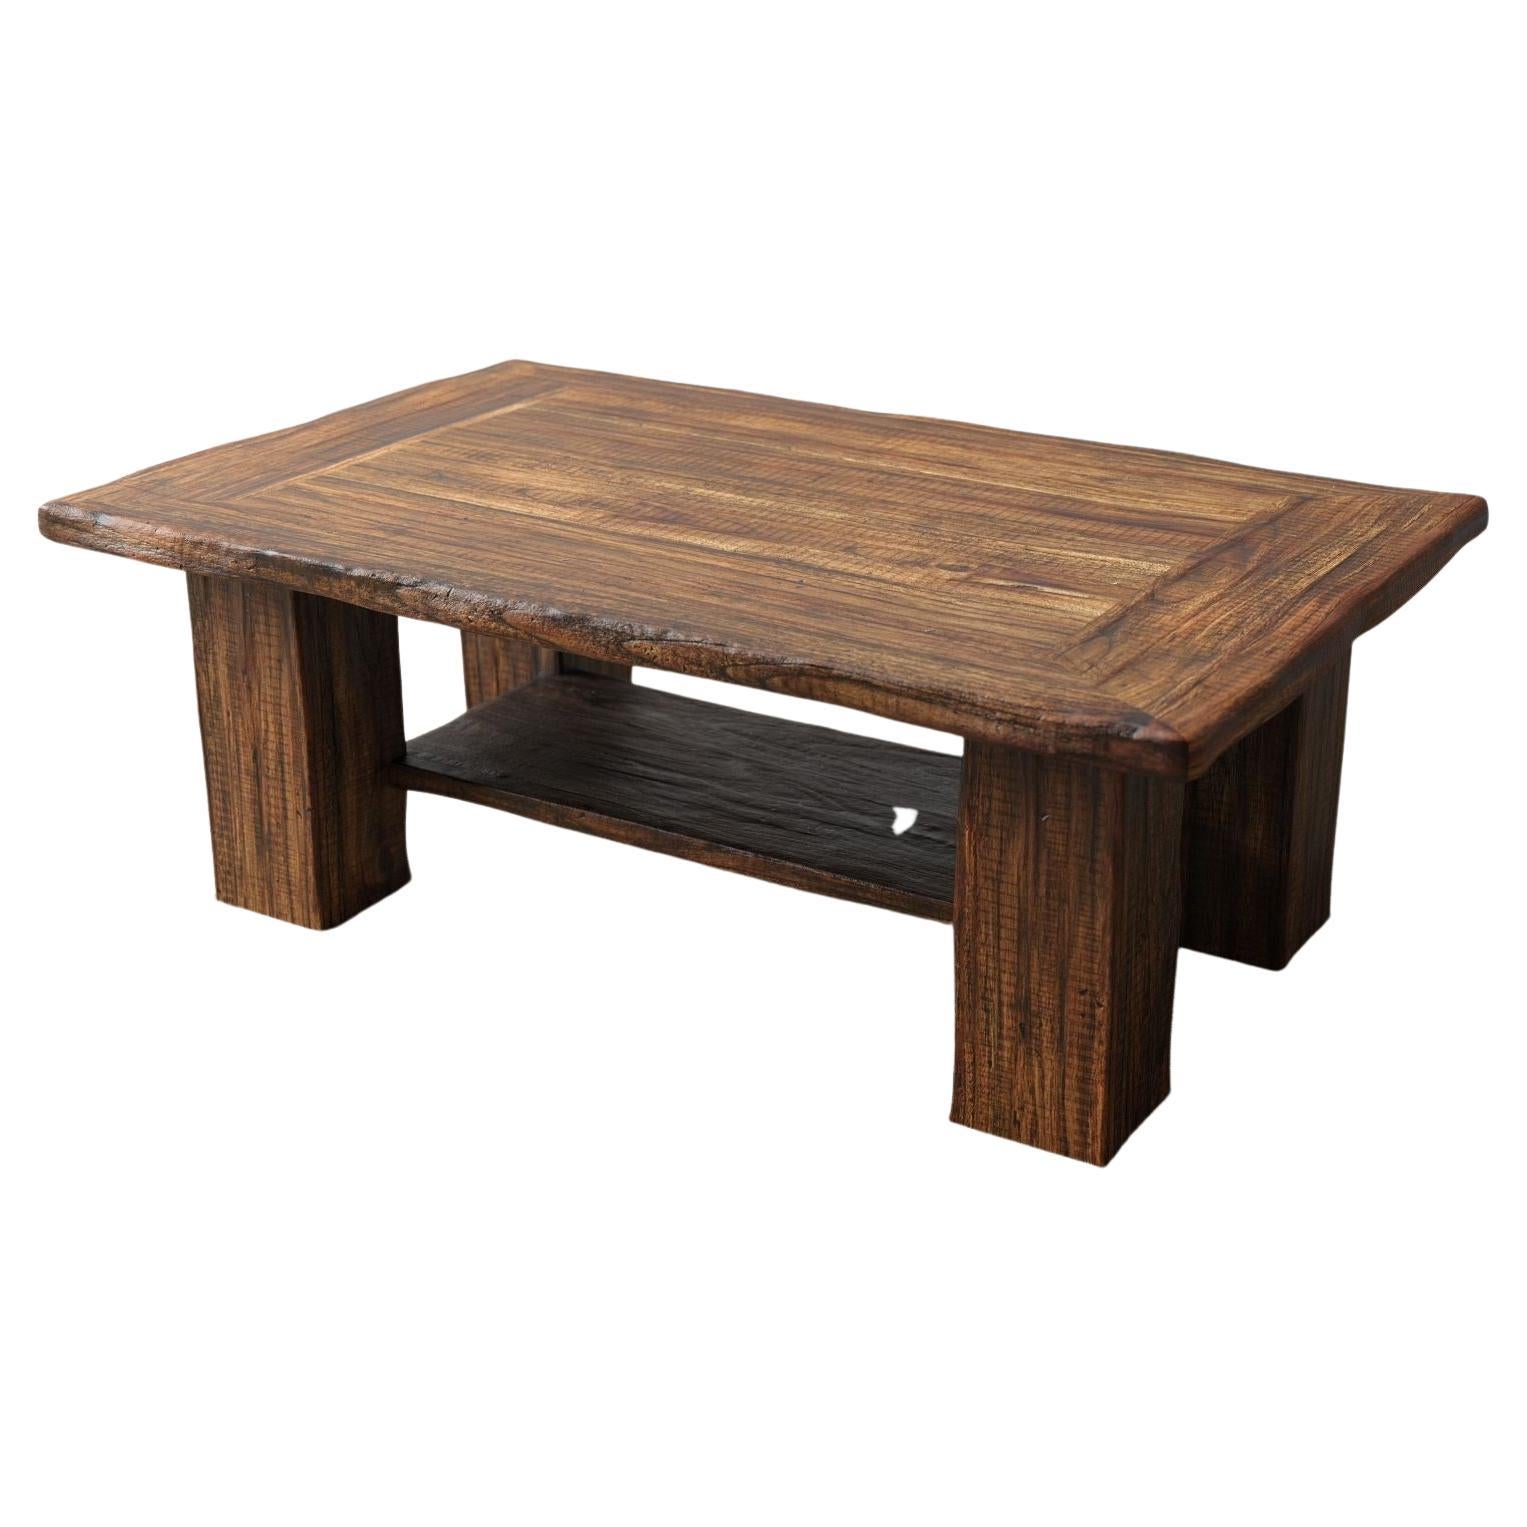 Rustic Solid Teak Sandblasted Coffee Table with Lower Shelf in Autumn